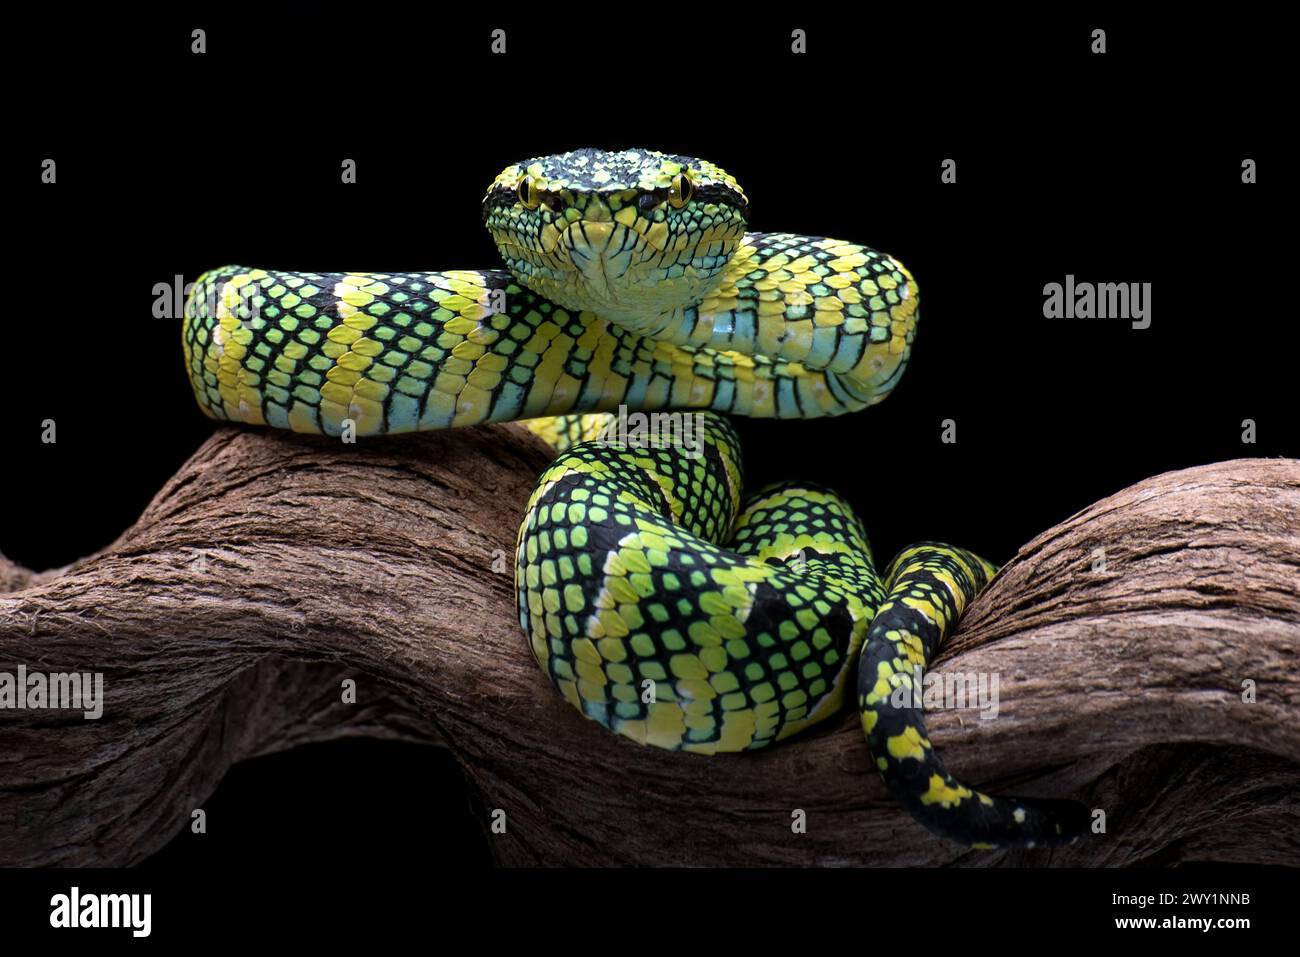 Wagler's pit viper on tree branch Stock Photo